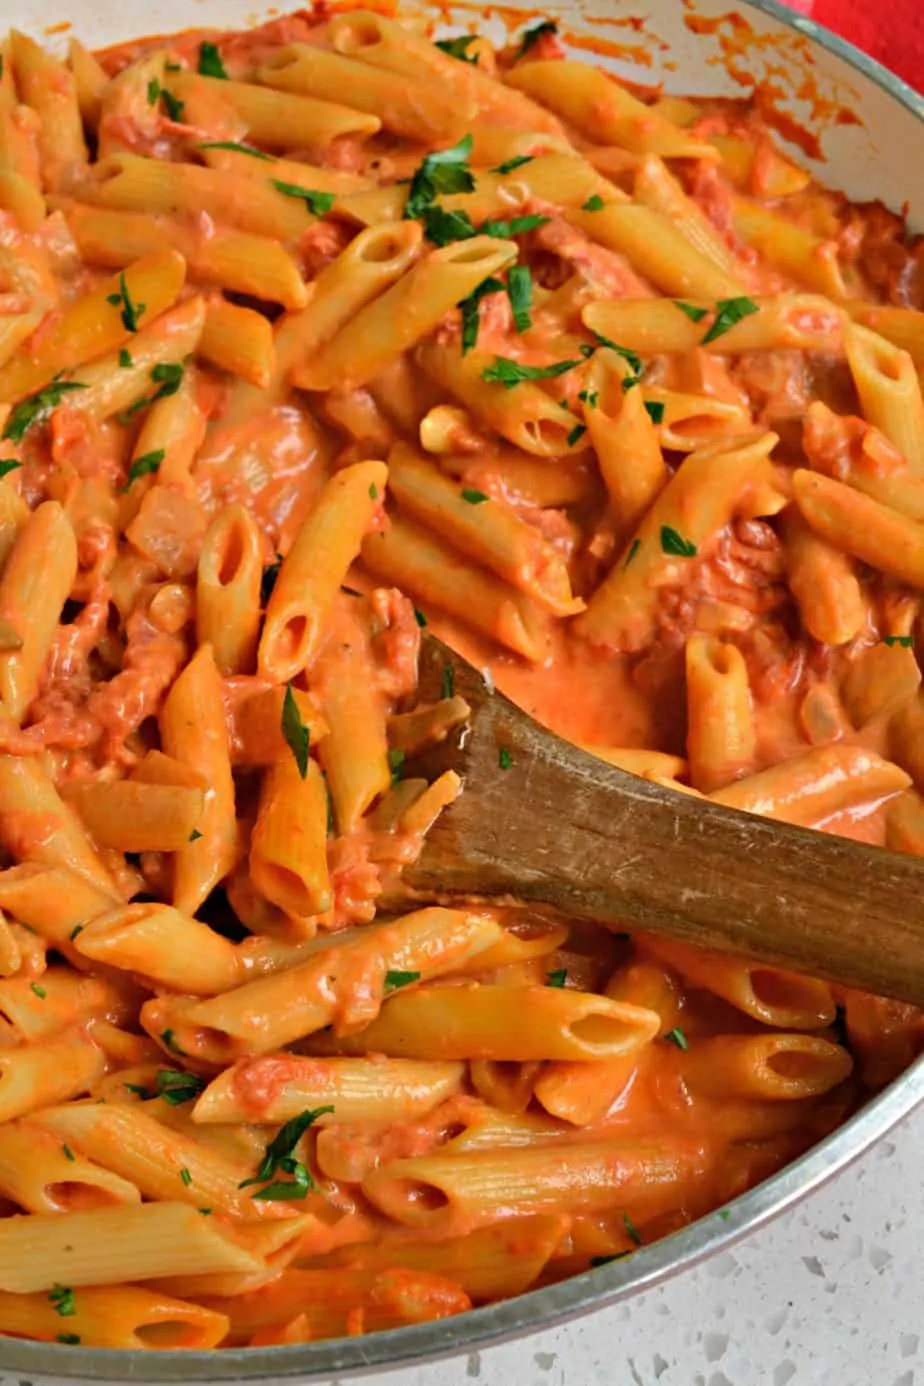 With easy and delectable recipes like this Penne alla Vodka you too can make restaurant quality pasta at home. 